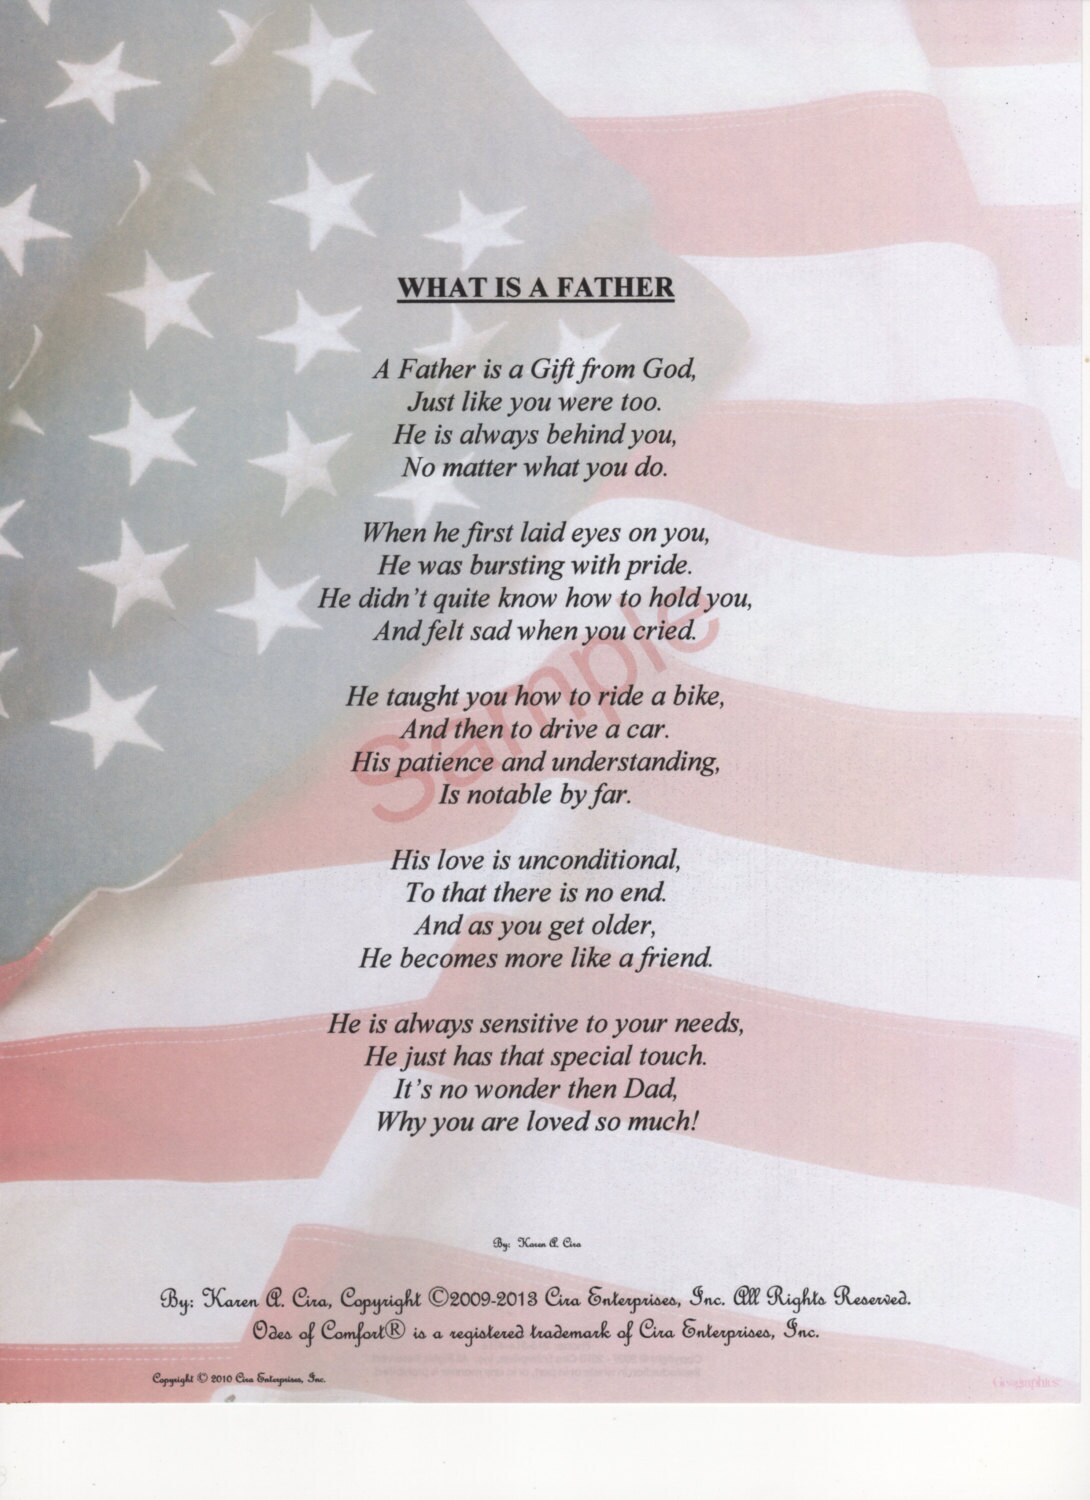 Five Stanza What Is A Father Poem shown on